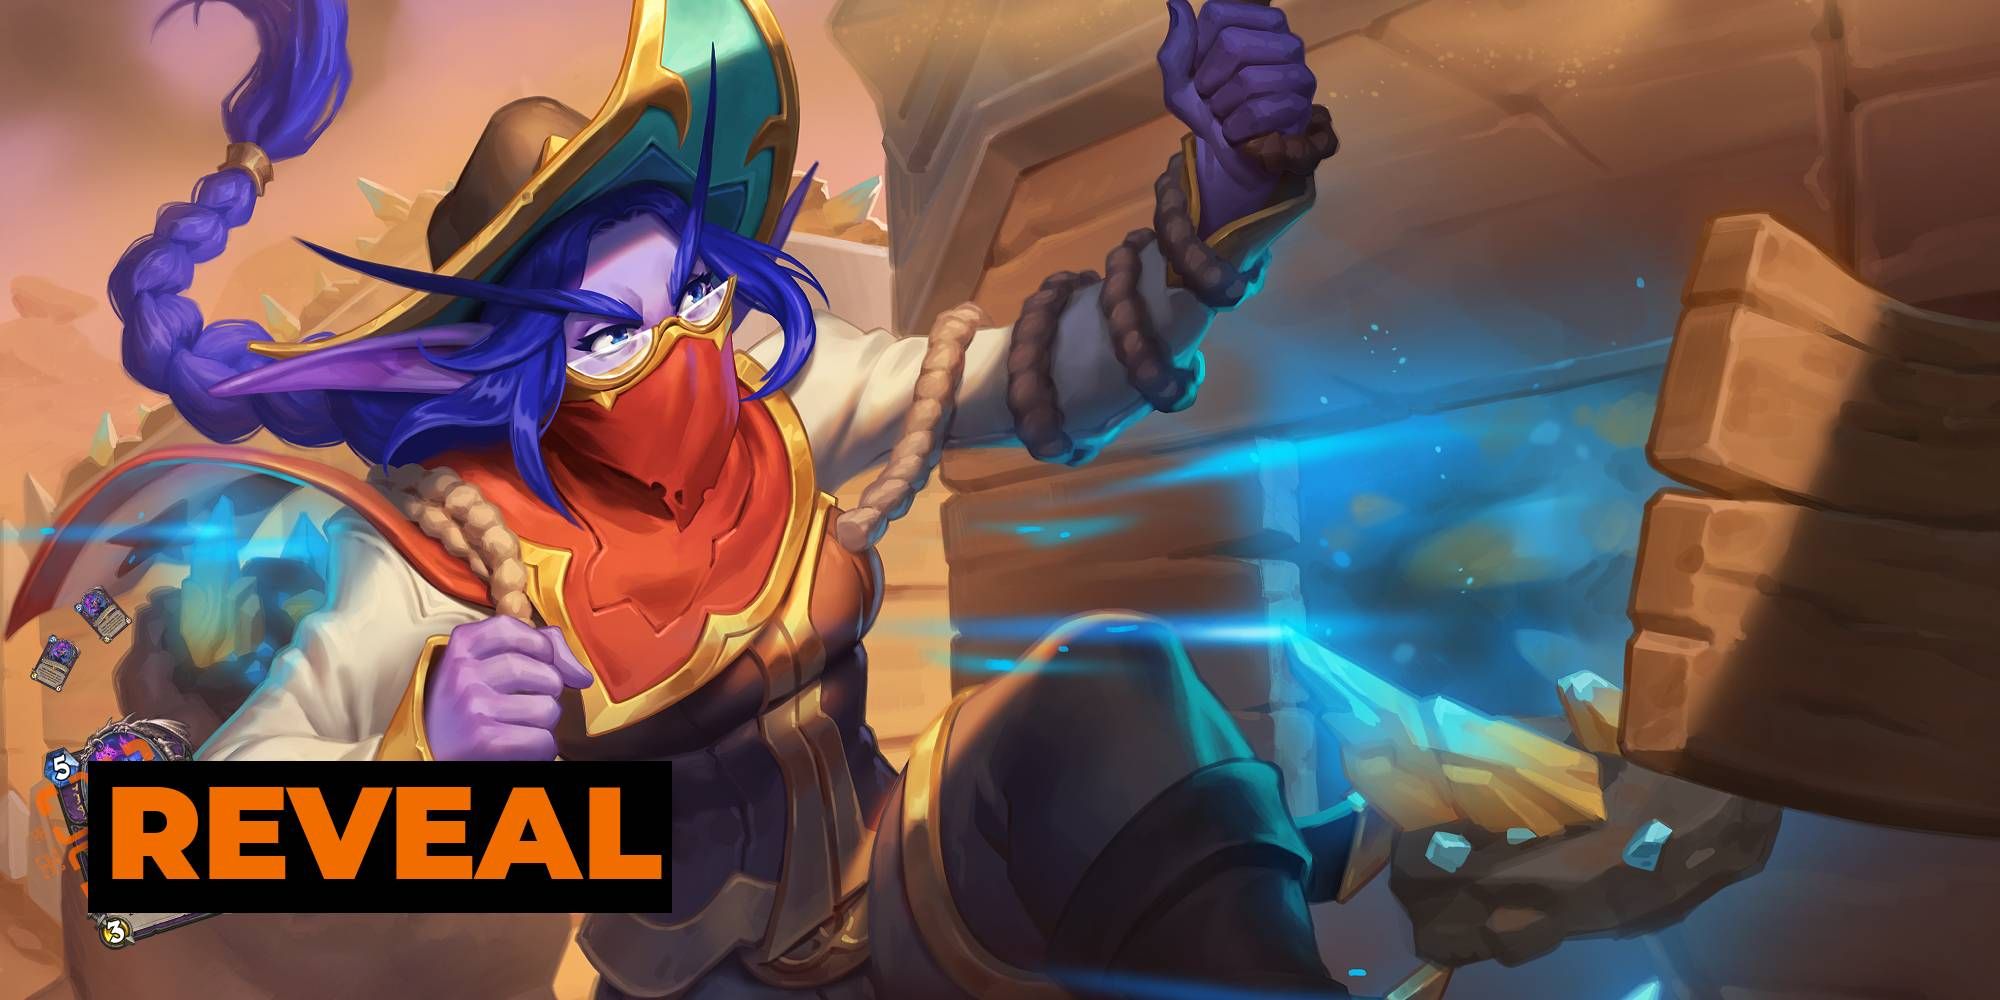 Hearthstone: Showdown in the Badlands - A Coin in the Wishing Well #he